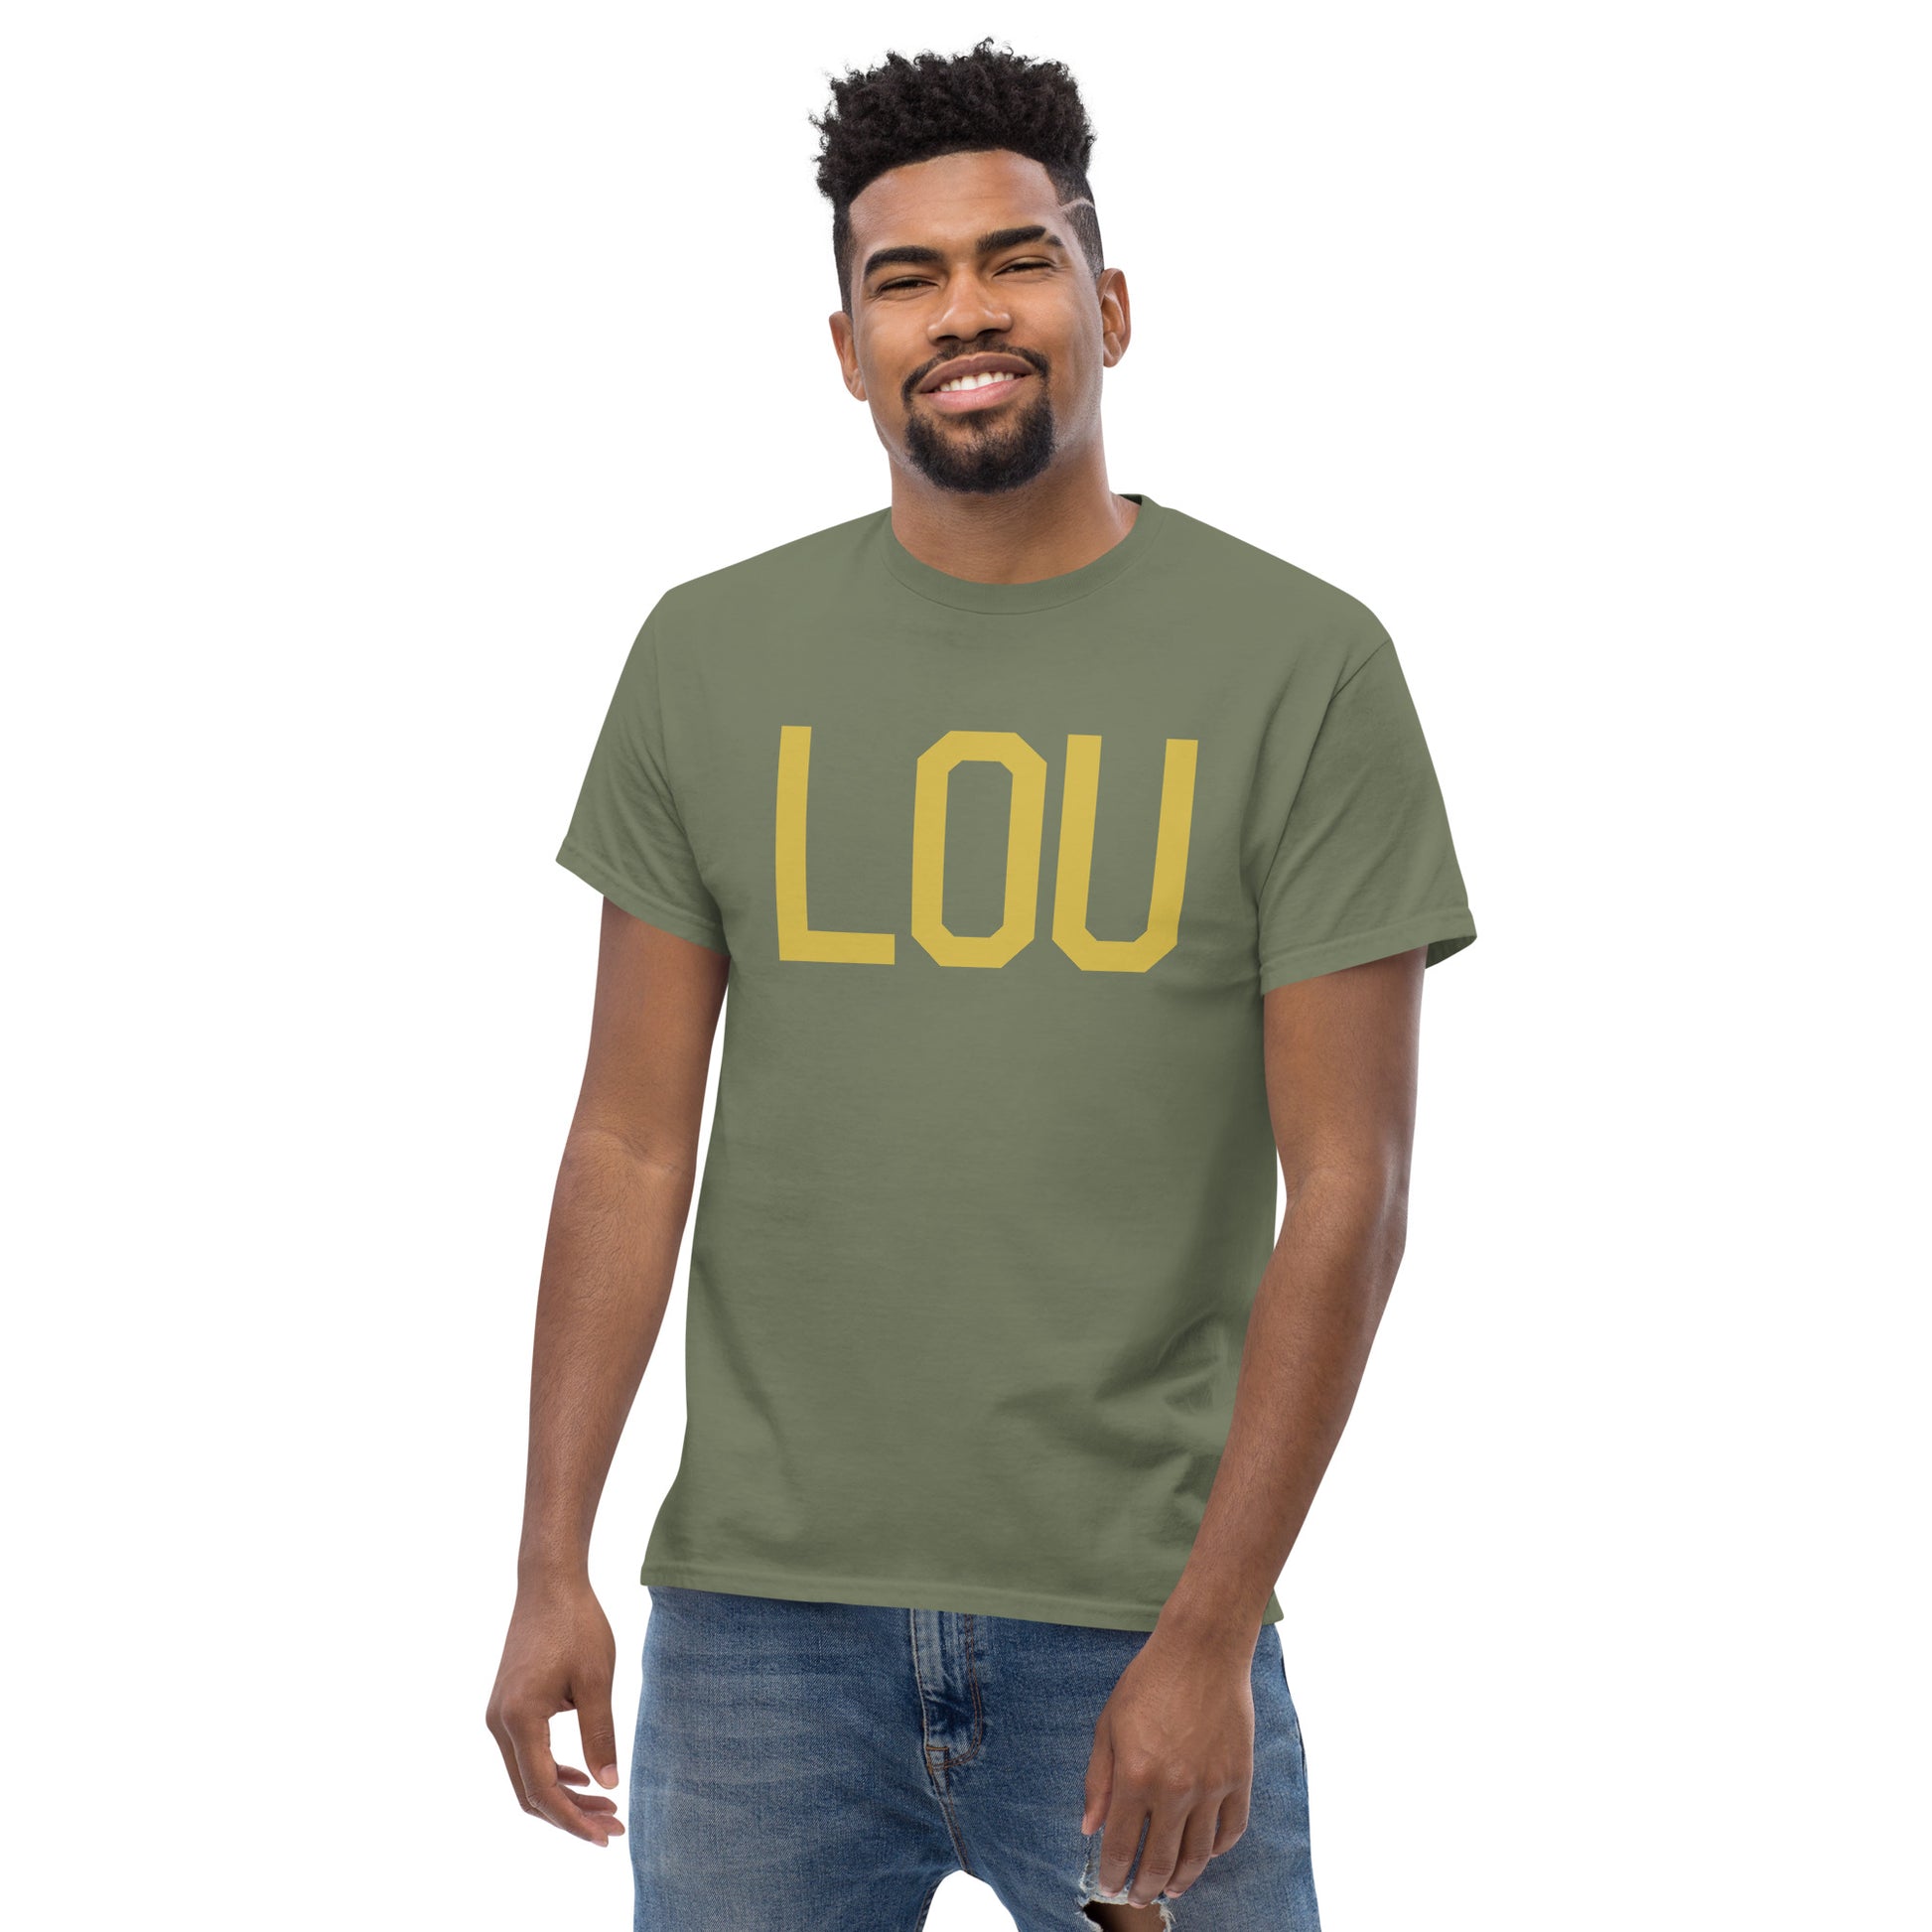 Aviation Enthusiast Men's Tee - Old Gold Graphic • LOU Louisville • YHM Designs - Image 06